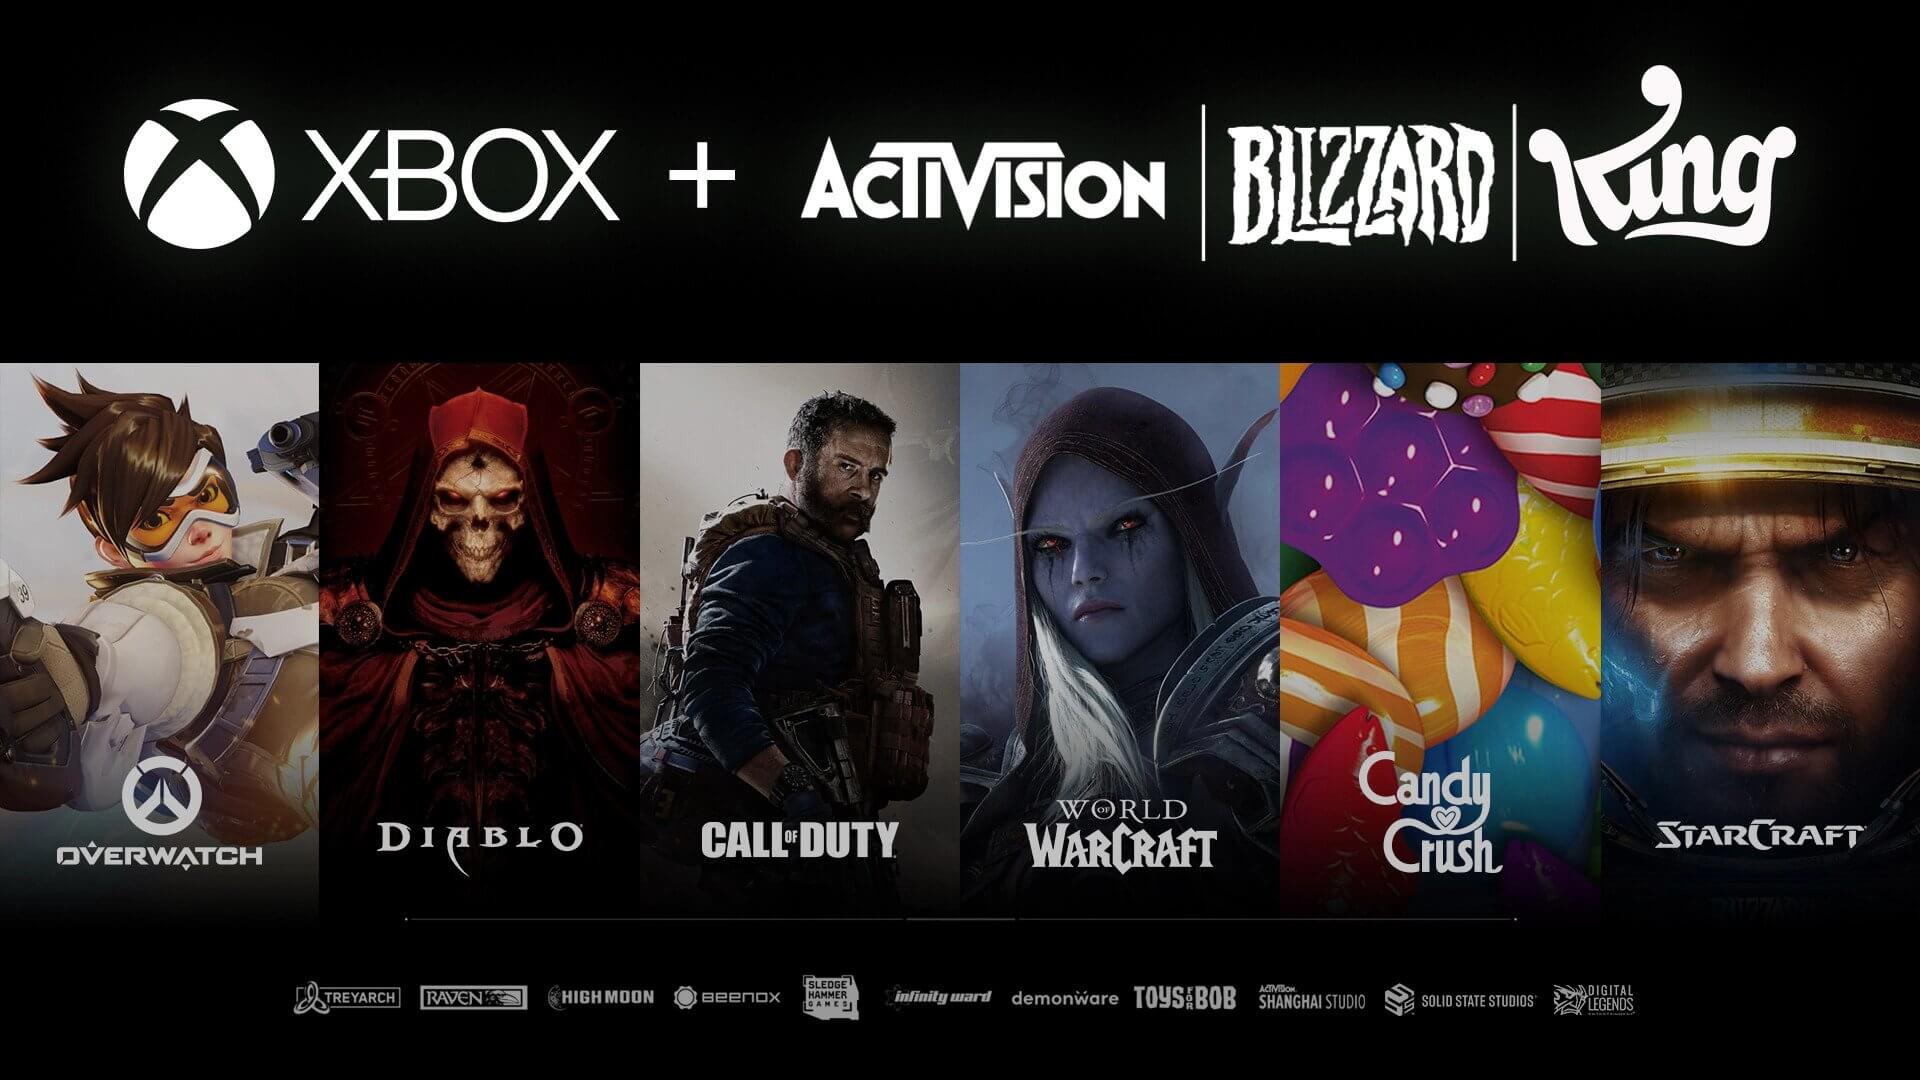 Data will still be the treasured element of the Activision-Blazzard acquisition, as Microsoft entrenches itself further in gaming even as it looks ahead to the metaverse